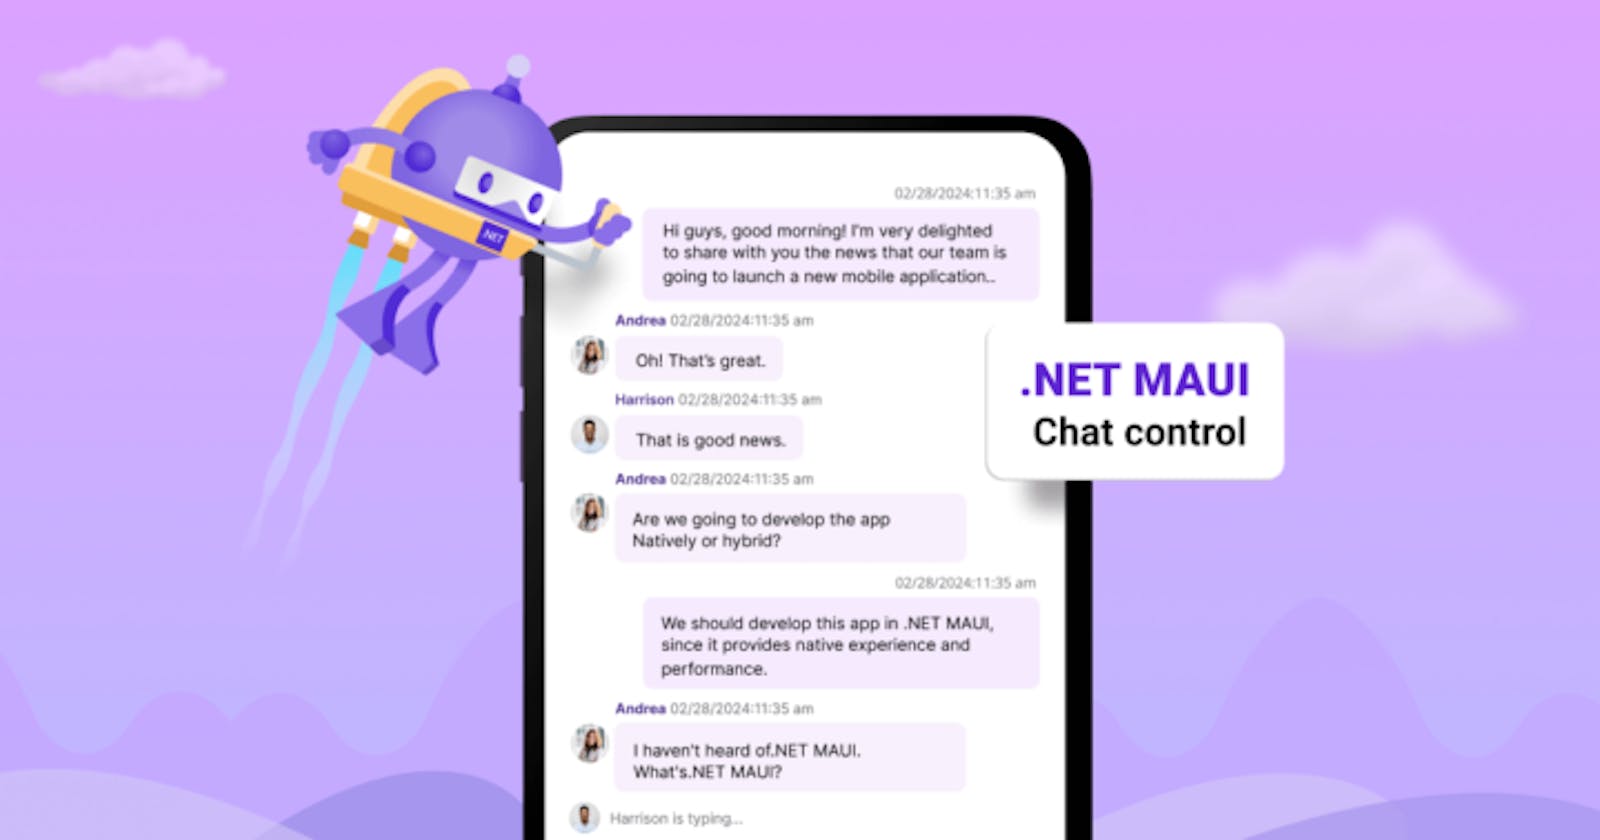 Introducing the New .NET MAUI Chat Control